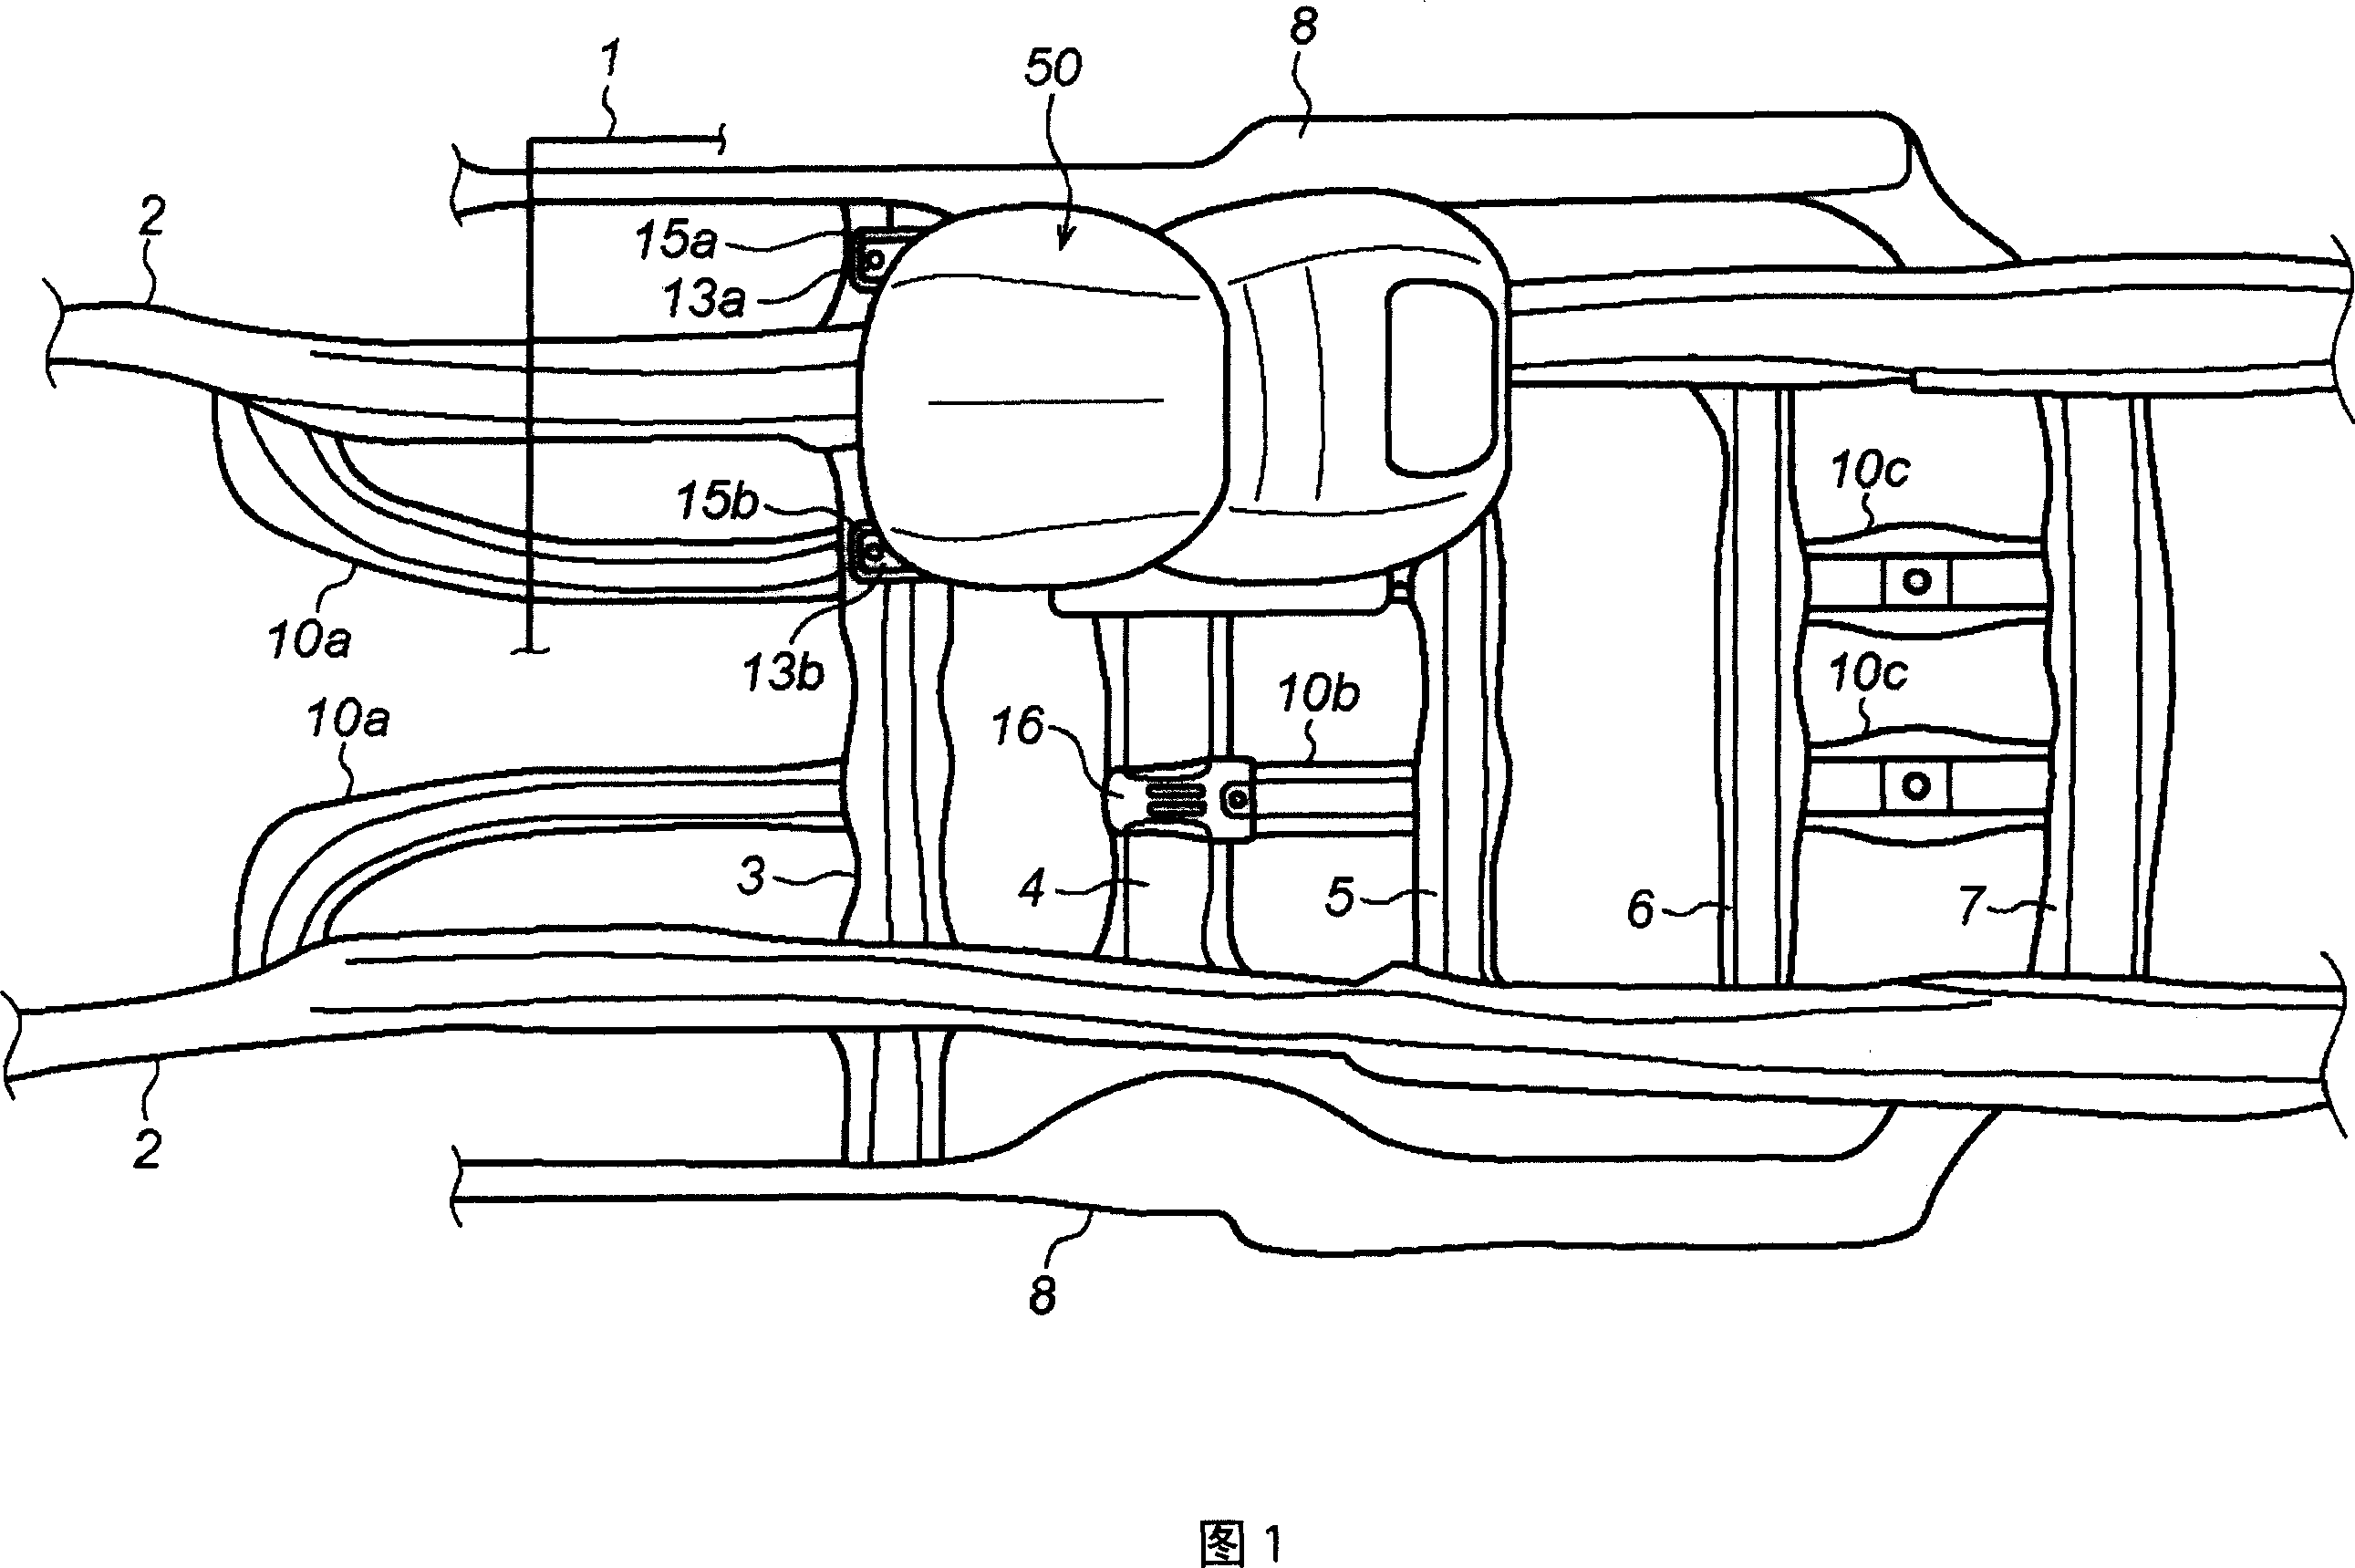 Lower vehicle body structure